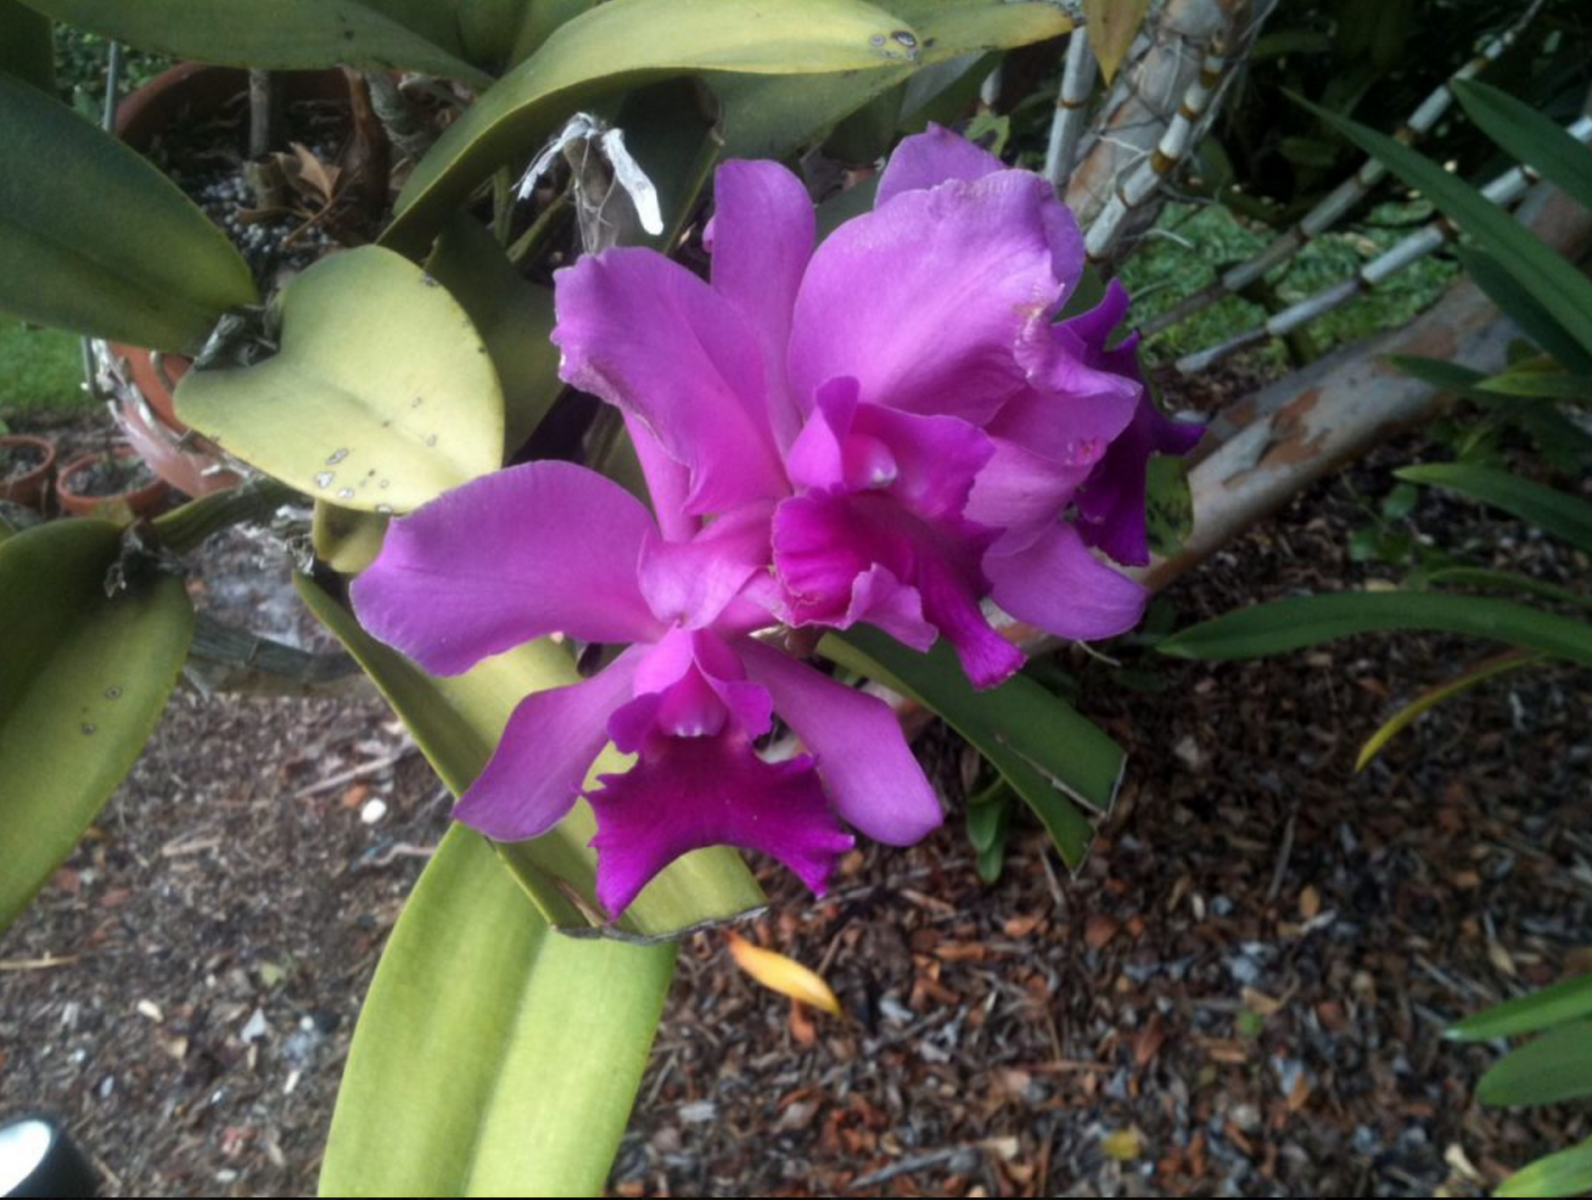 Blue Gold™ eradicated the massive Black Spot disease from these Orchids.